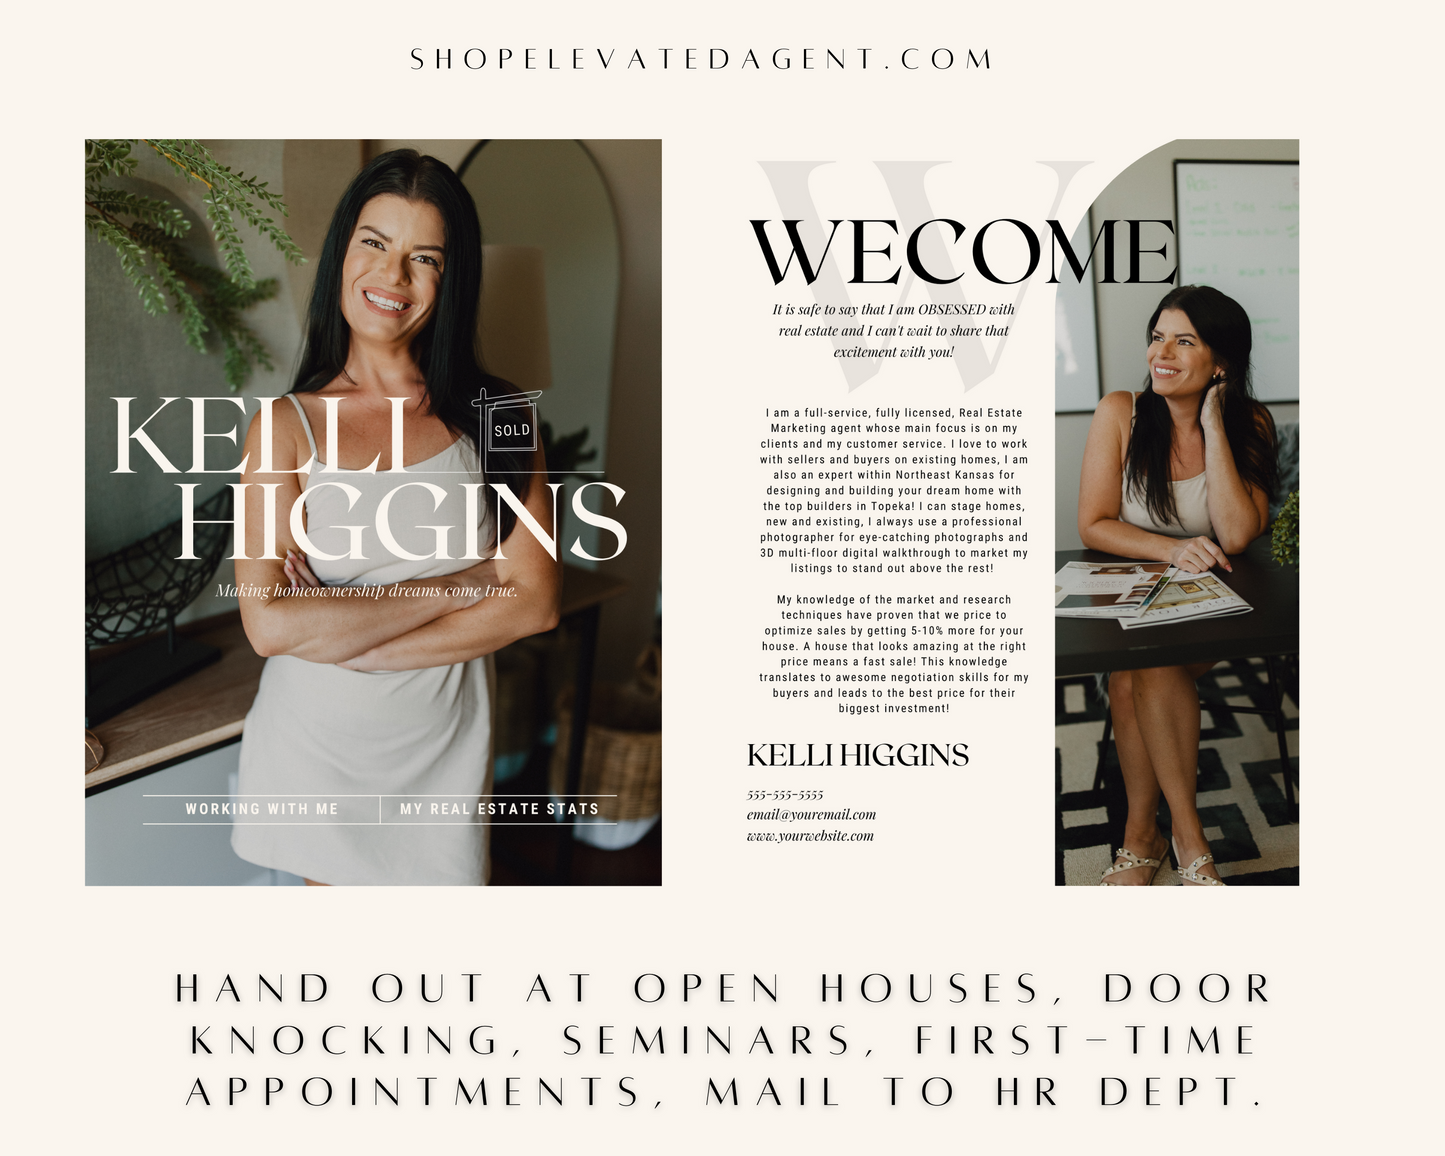 Real Estate Agent Promotional Magazine - Exclusive Brand Style